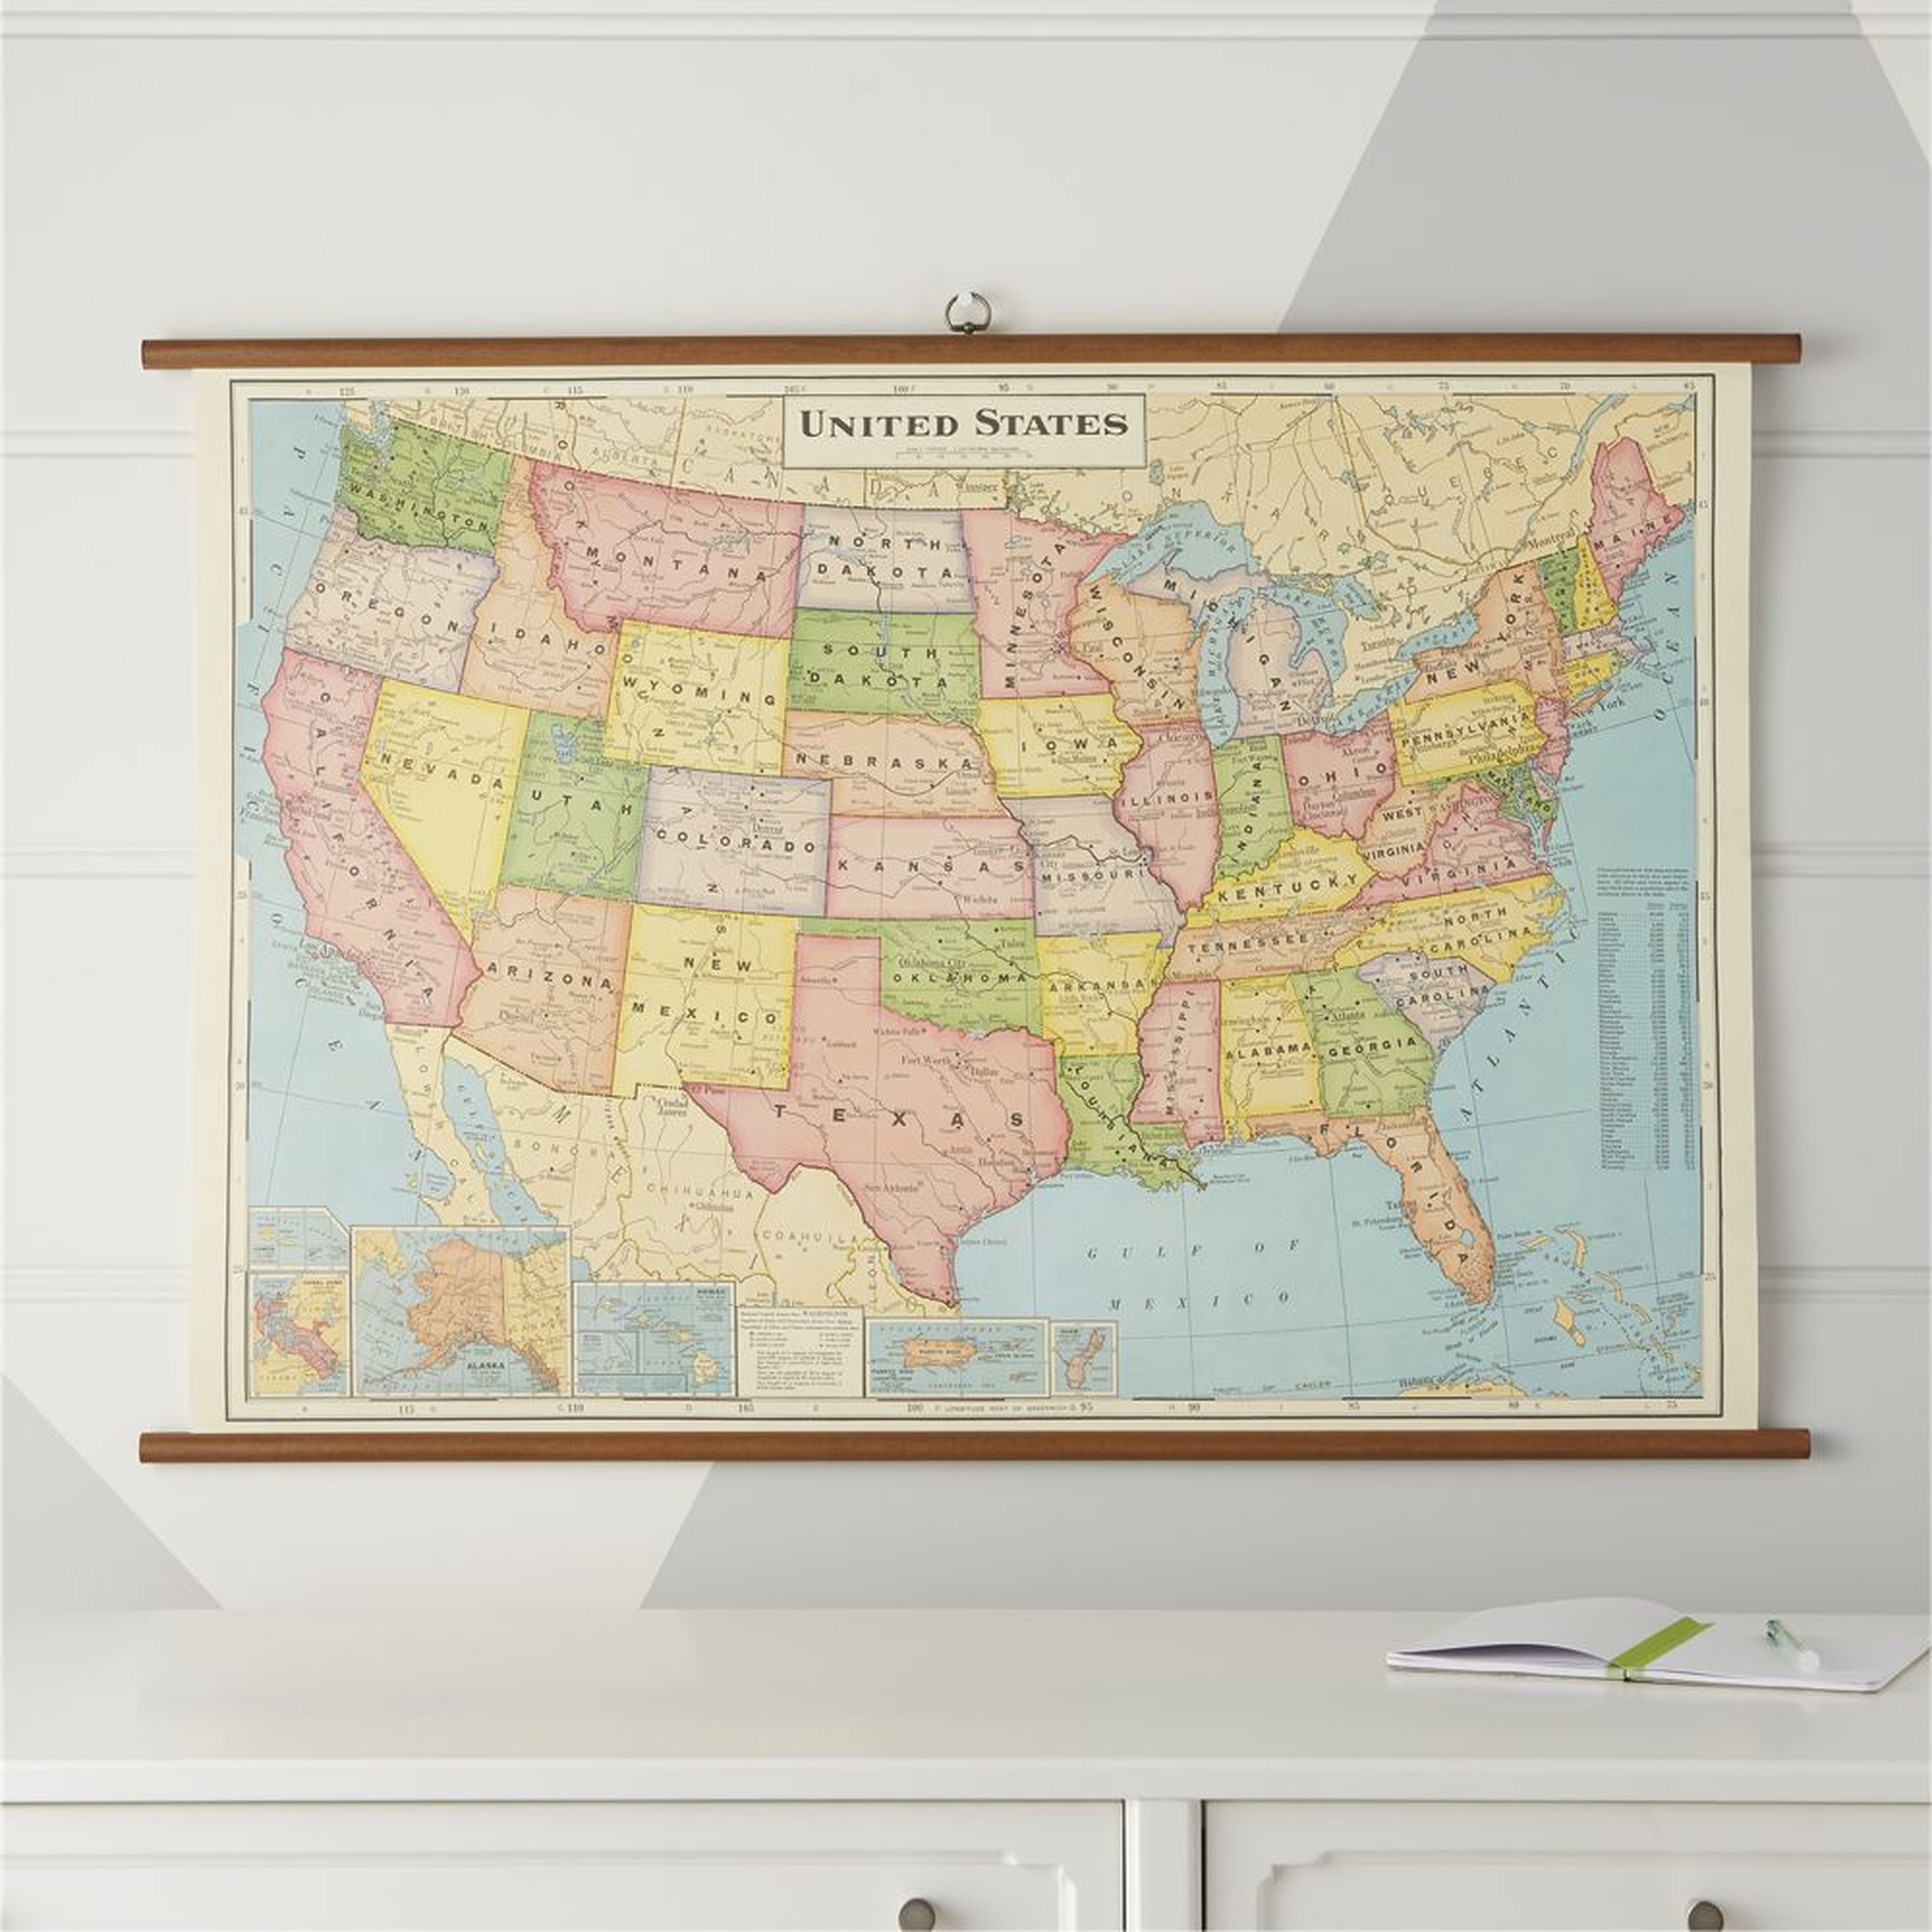 United States of America Chart - Crate and Barrel